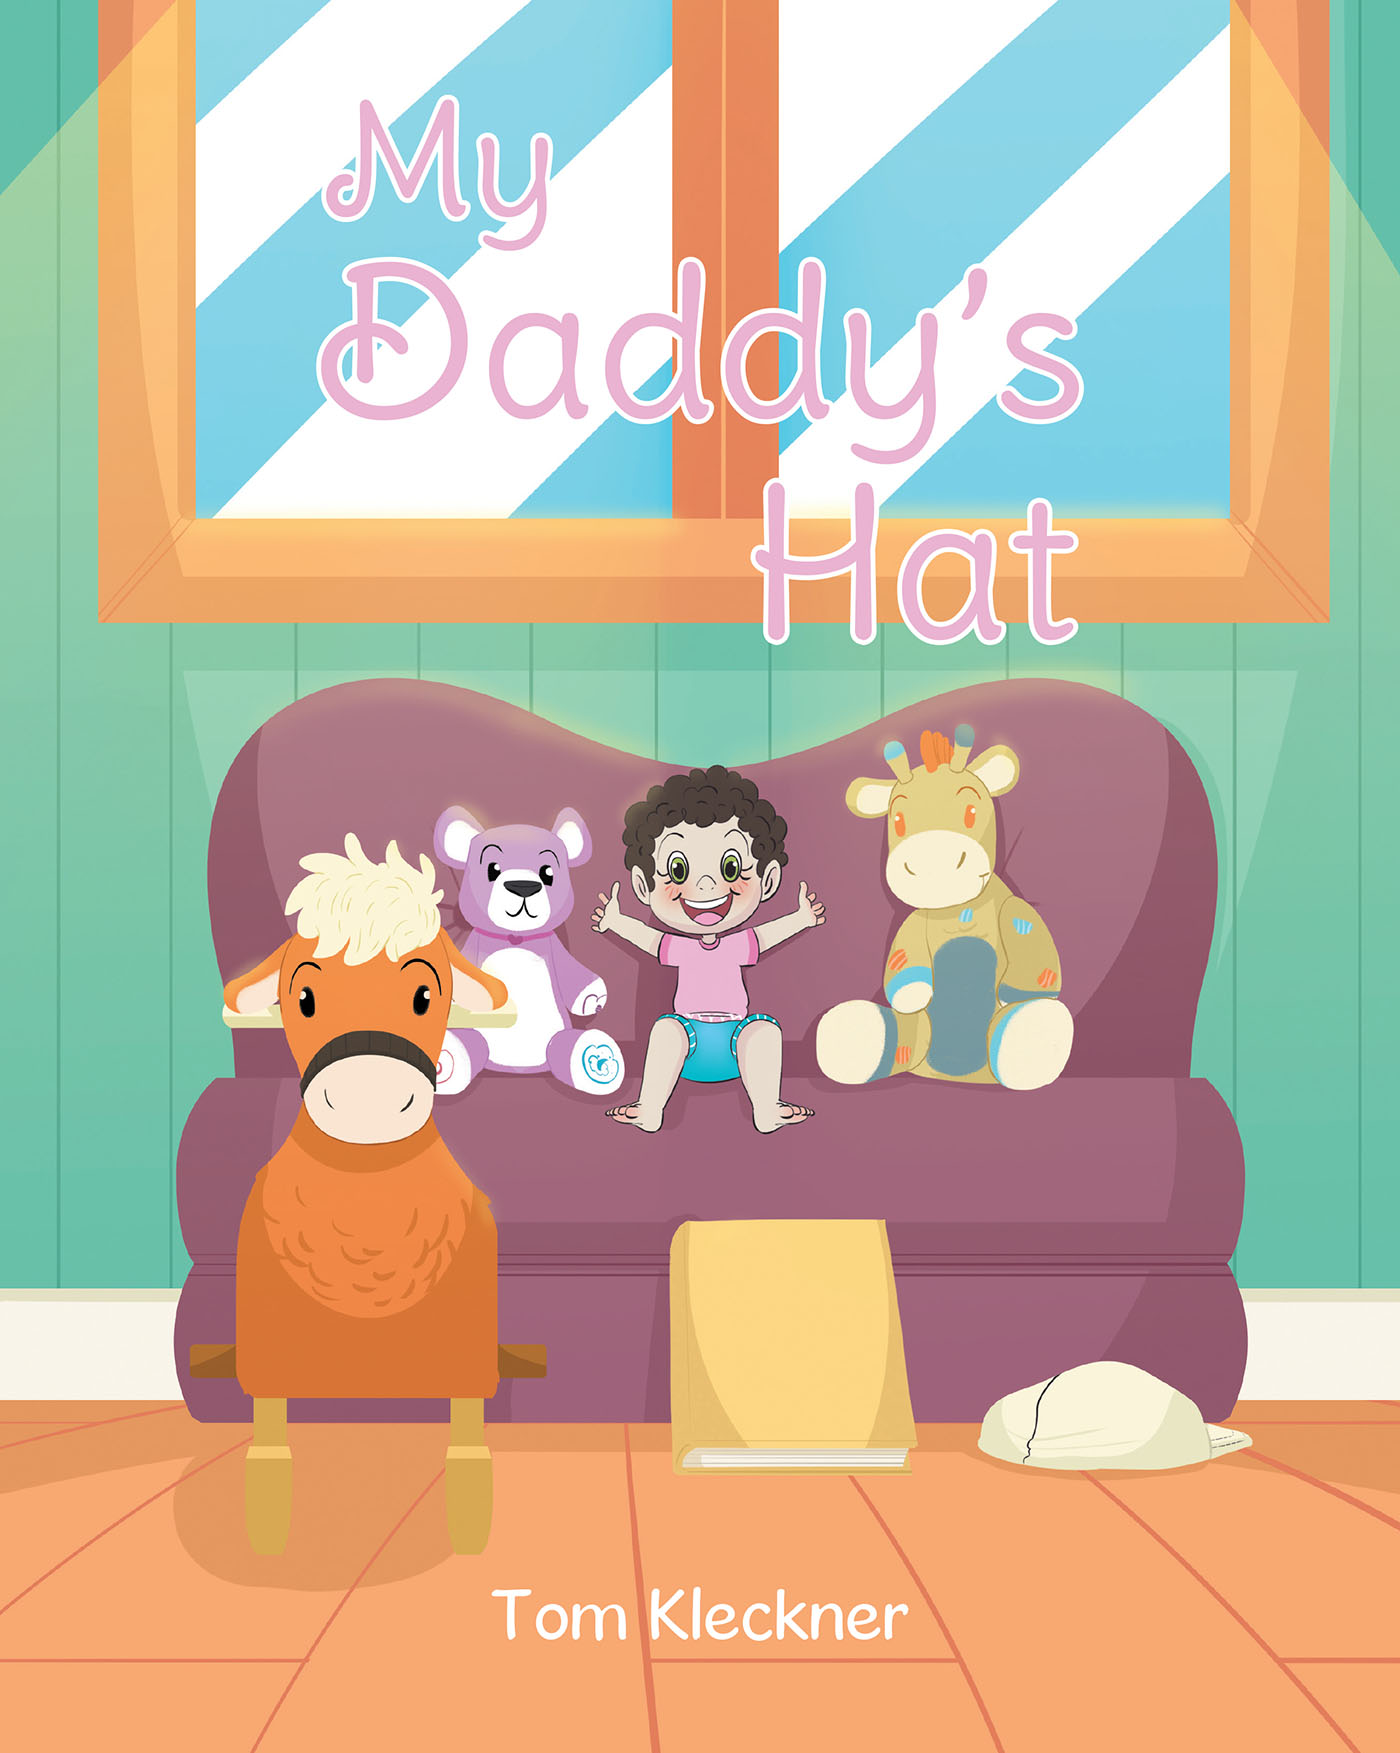 Author Tom Kleckner’s New Book, "My Daddy’s Hat," is a Fun and Playful Children’s Story Told Through Clever Rhyme and Delightful Illustrations